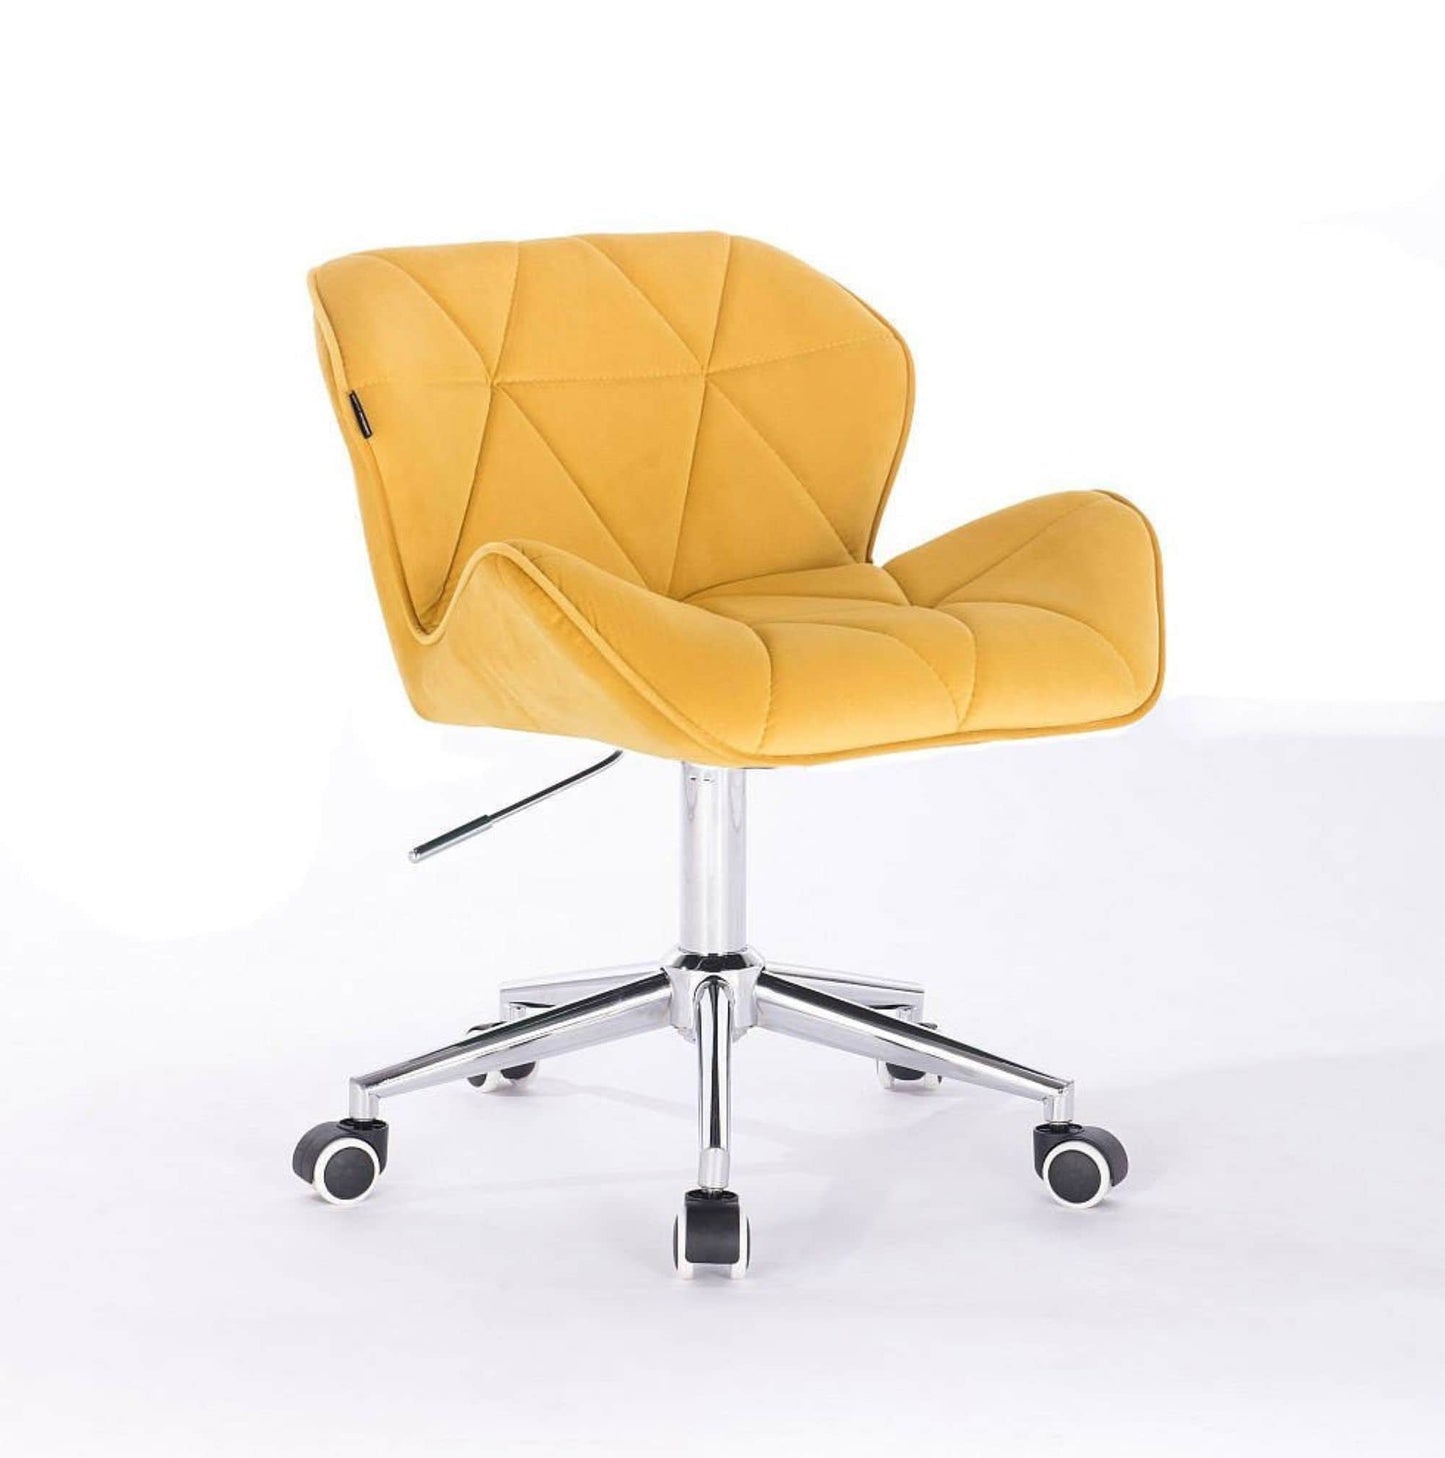 Beautiful & stylish Velour Designer adjustable swivel office/desk chair with gold base - Many colours available